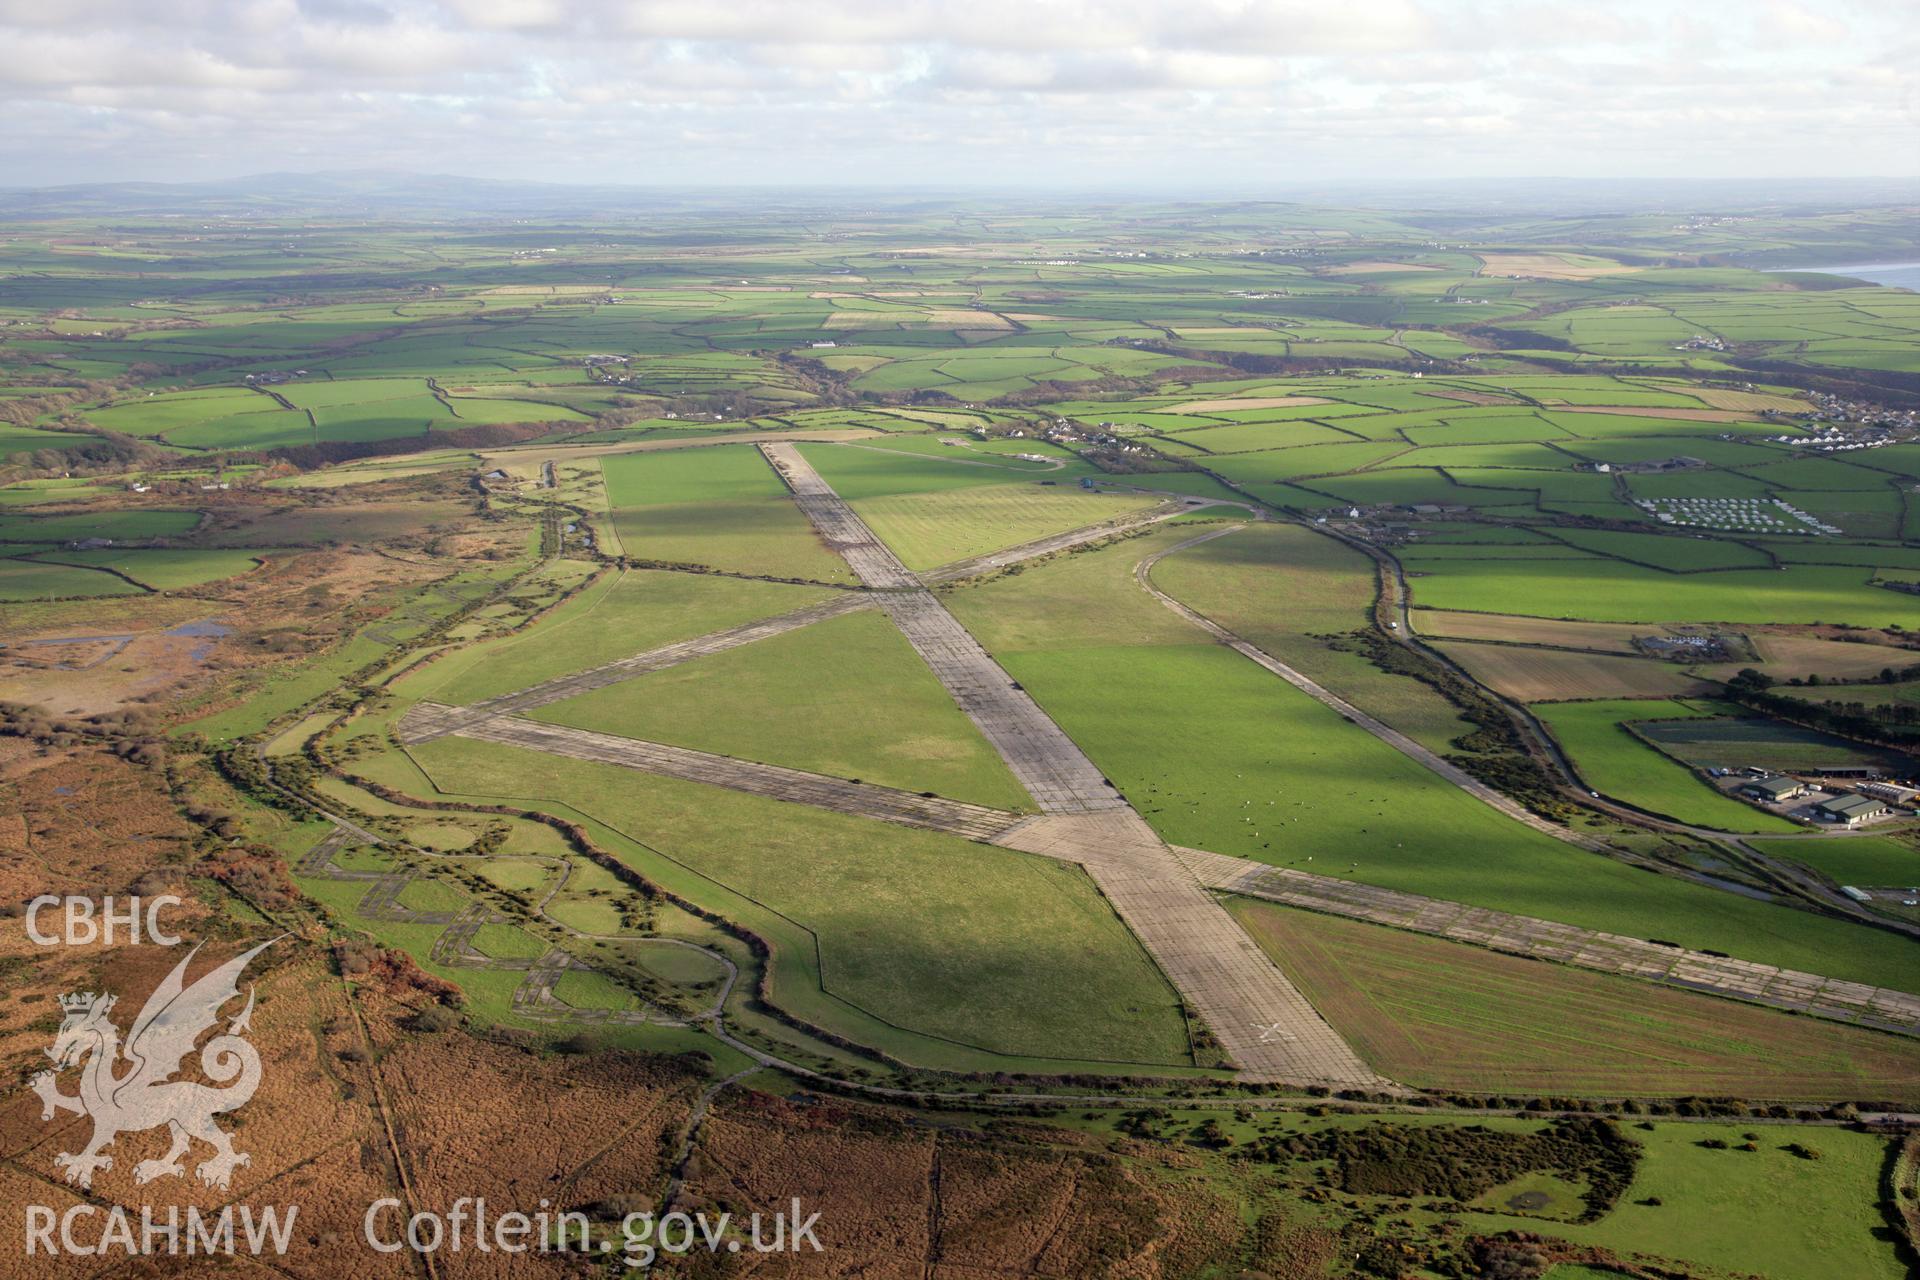 RCAHMW colour oblique photograph of St Davids Airfield, viewed from the south. Taken by O. Davies & T. Driver on 22/11/2013.